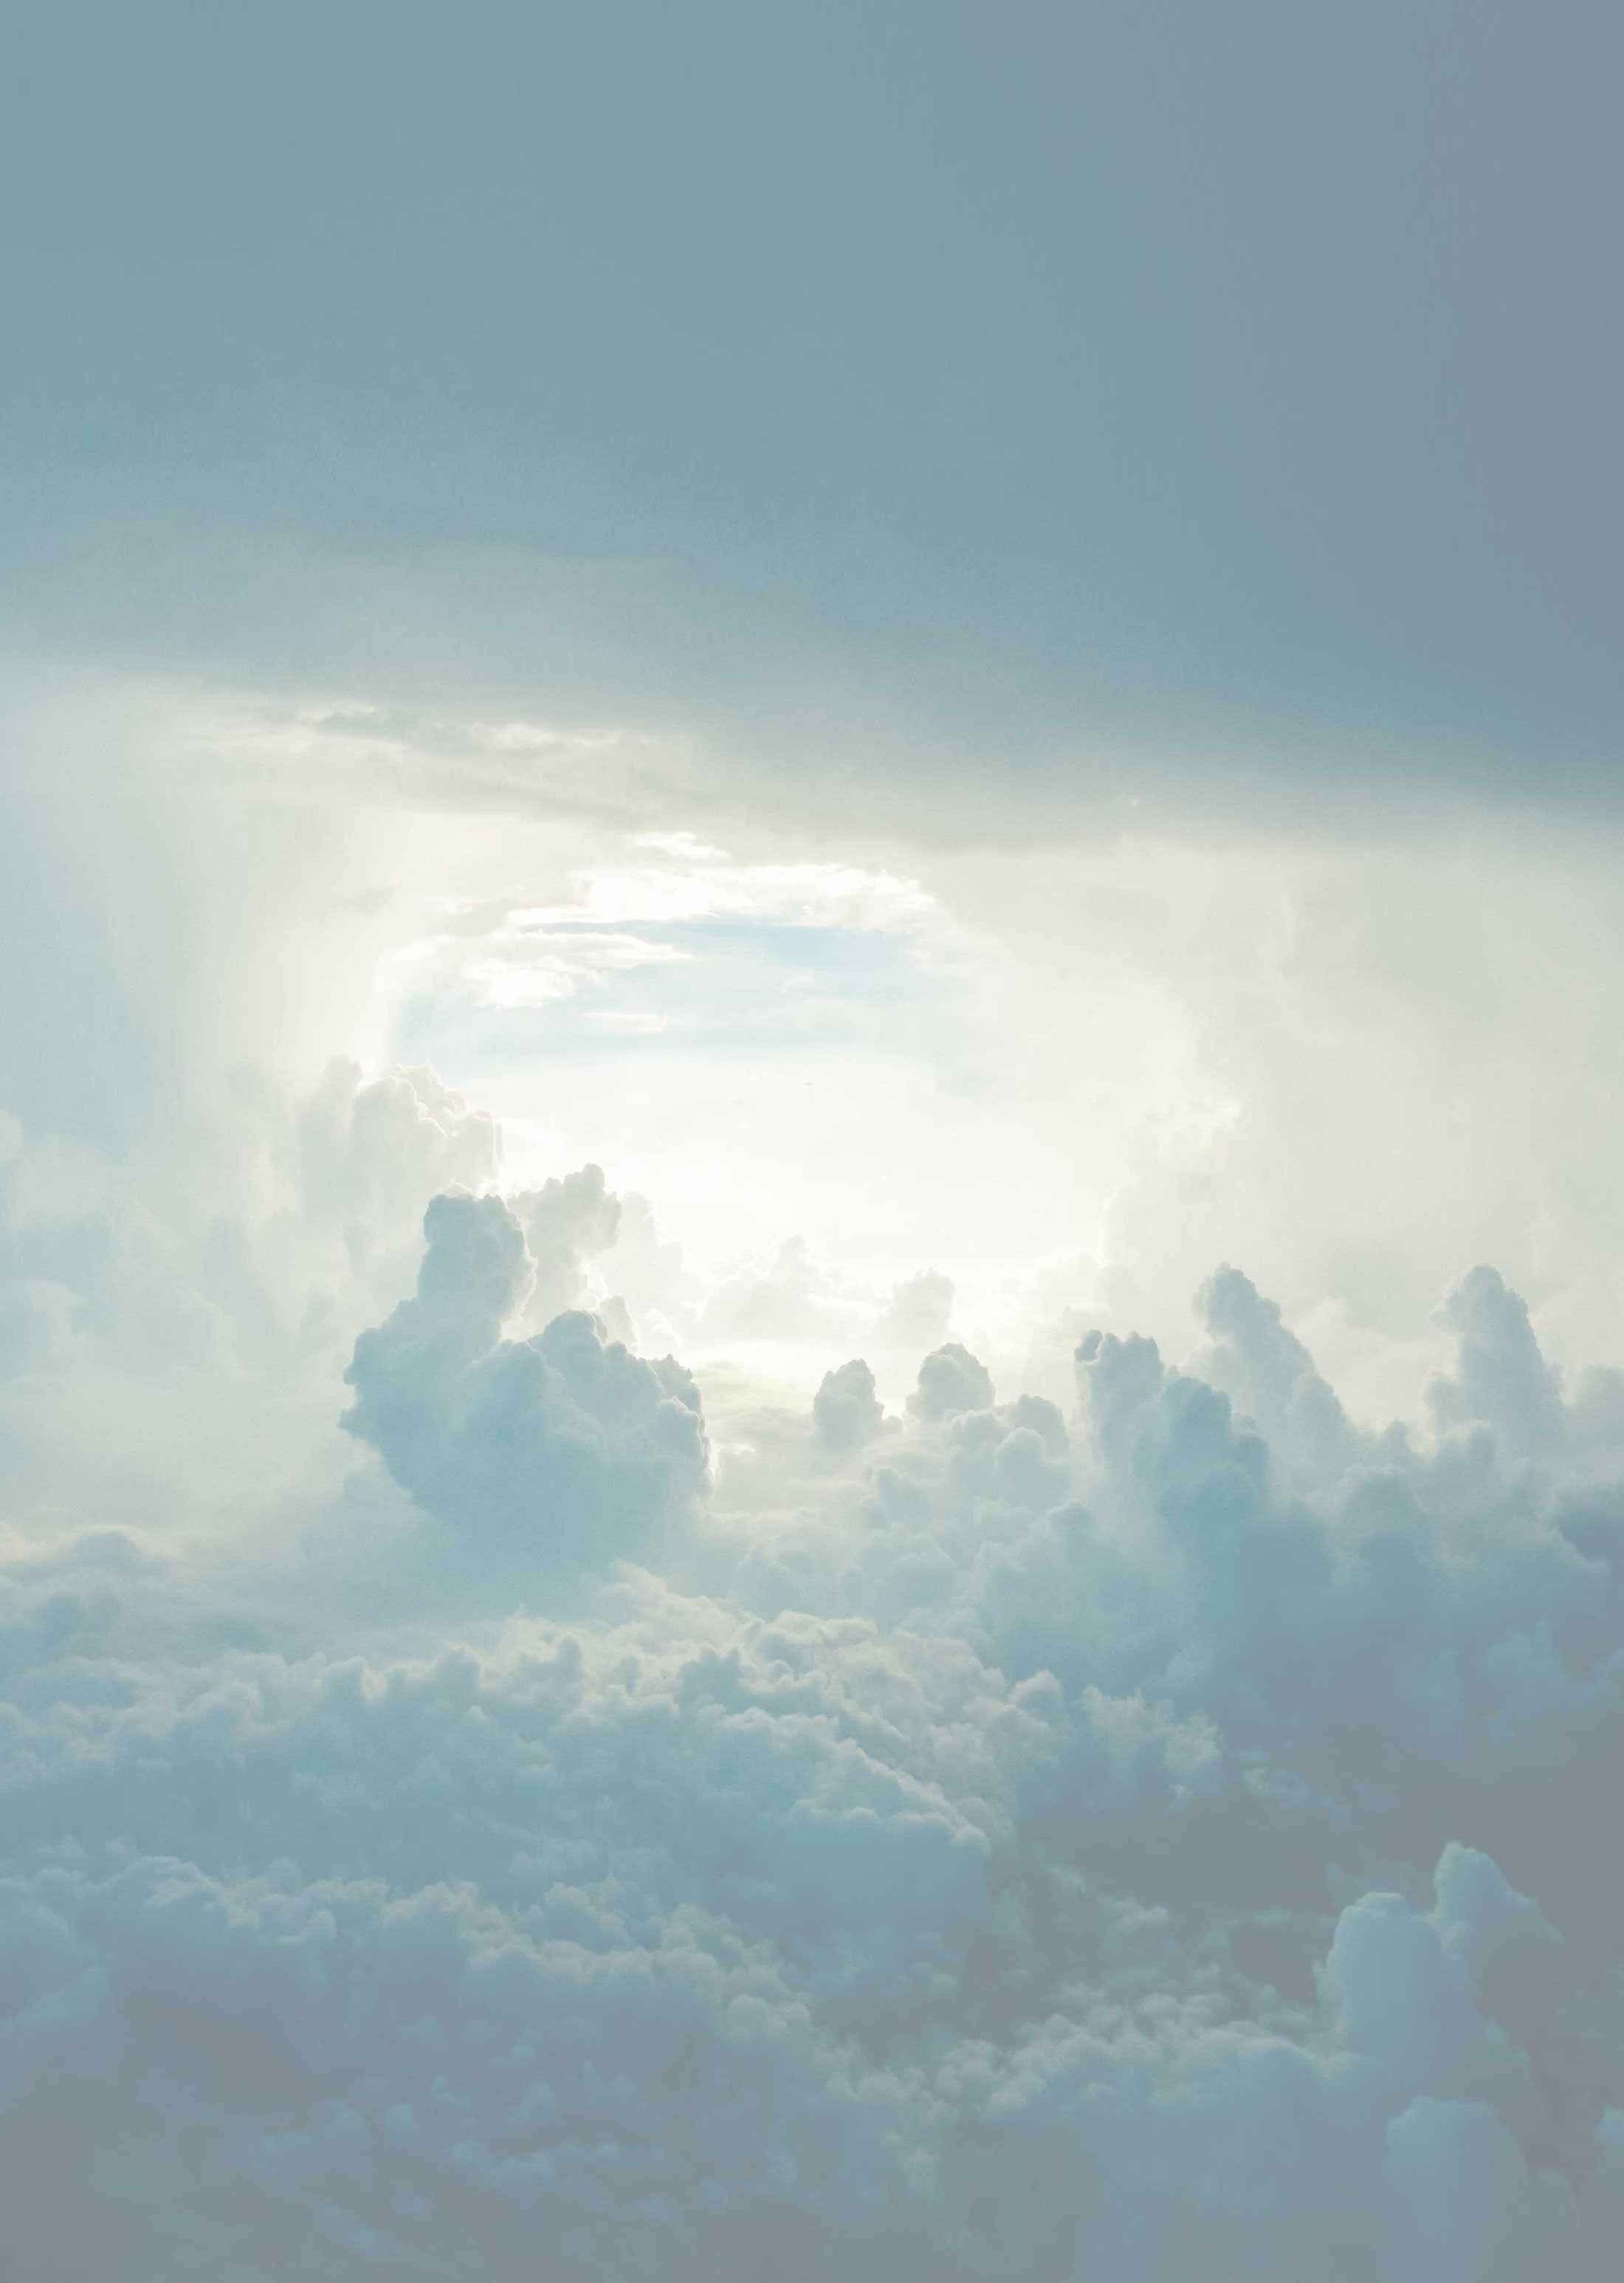 Picture yourself in the quiet sanctity above these clouds to invoke your creative spirit, peace and harmony